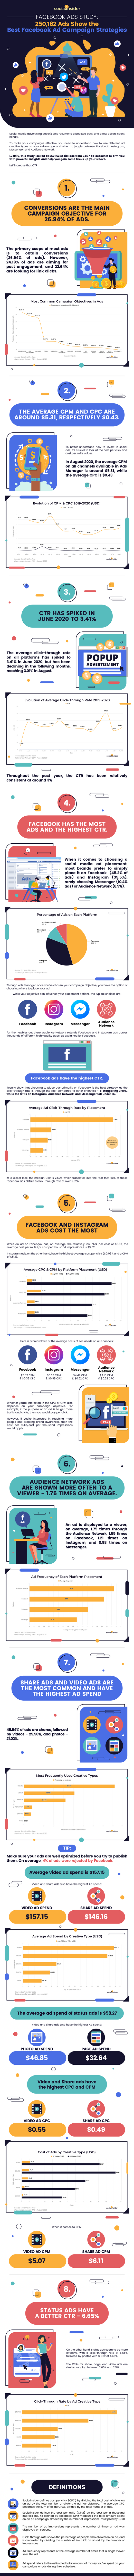 Facebook Ad Performance Trends you Should Know [Infographic]